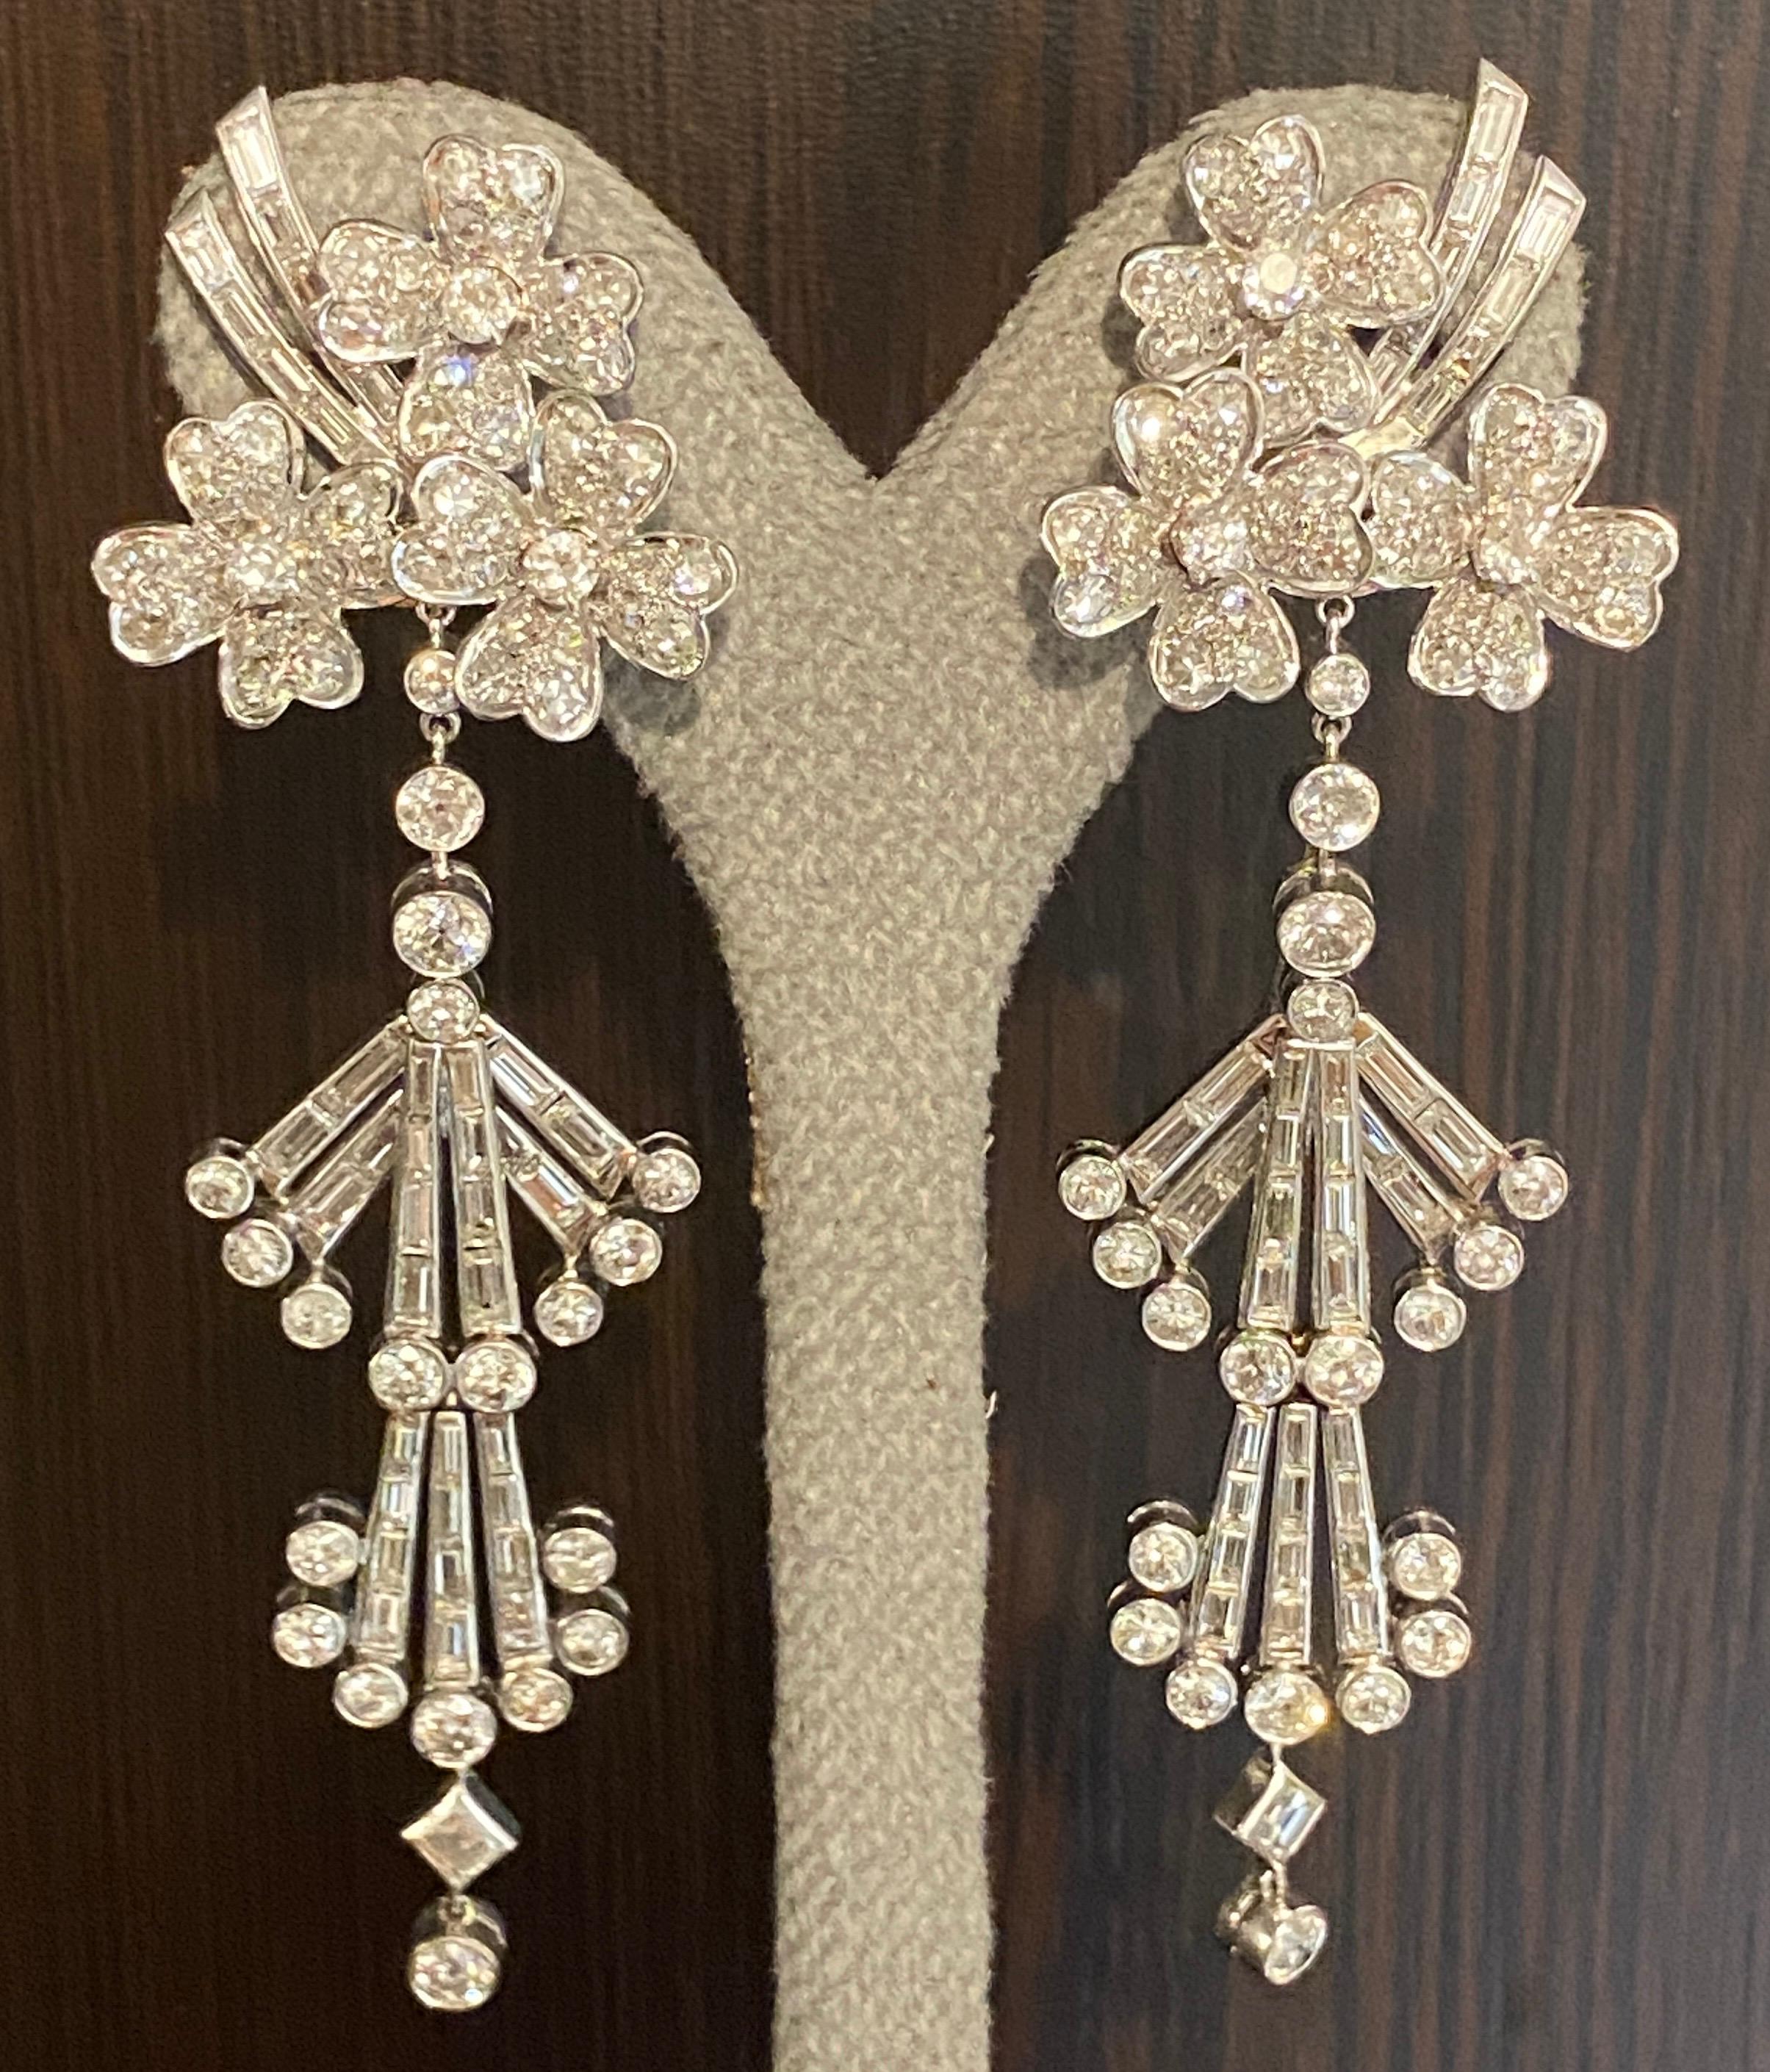 This beautiful example of Art Deco platinum and diamond chandelier earrings can be worn in two styles. As shown in the photos below, the long dangly extensions to the earrings can easily be detached to leave a stunning stud alternative. Both styles